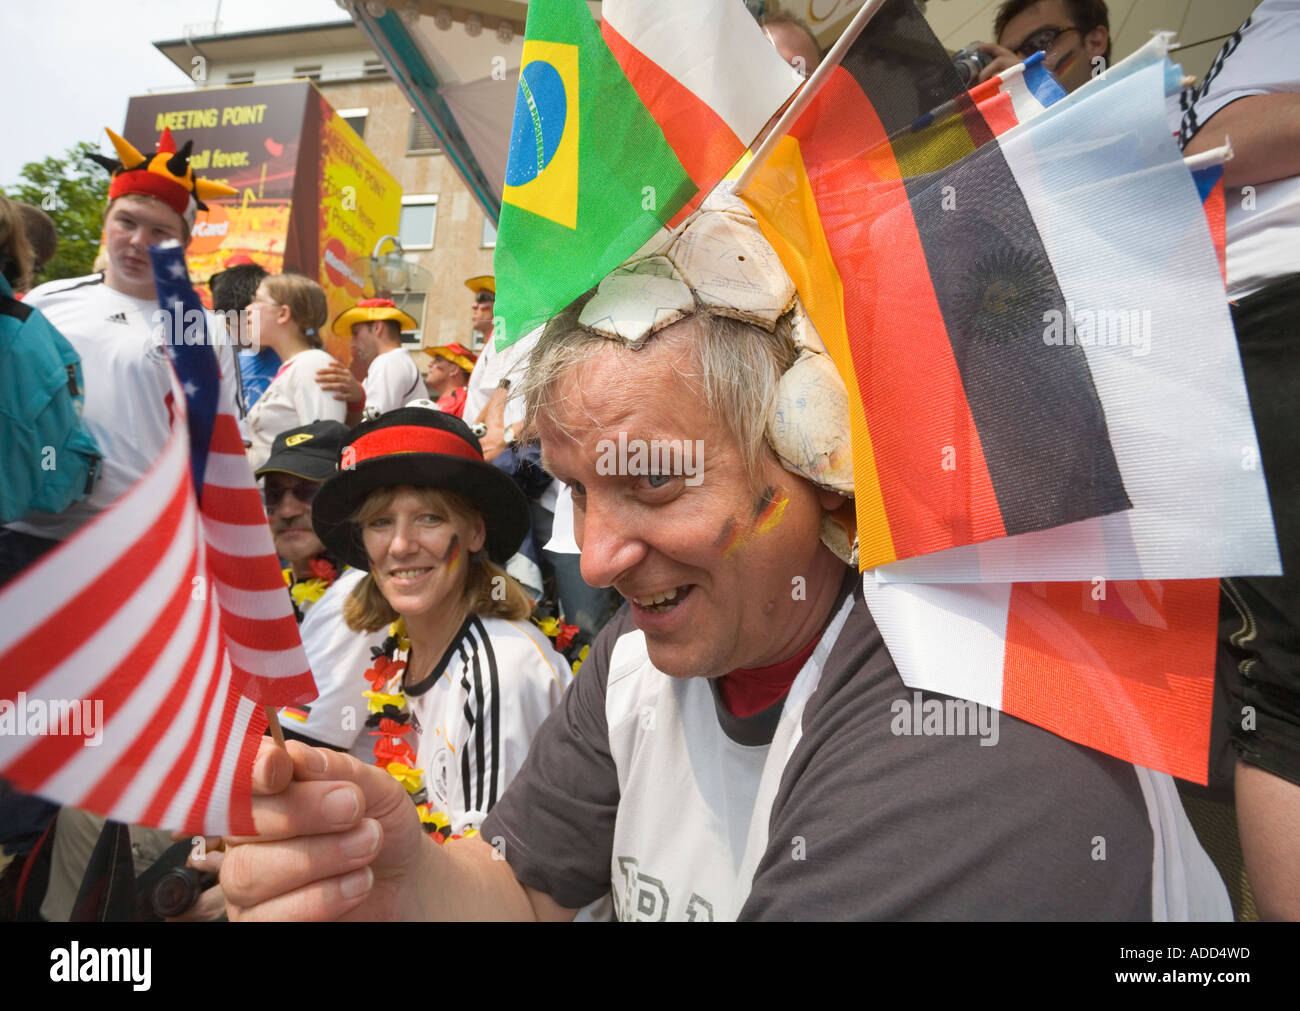 A football fan wearing a has been leather ball with various flags attached as a hat at a football world cup public viewing event Stock Photo